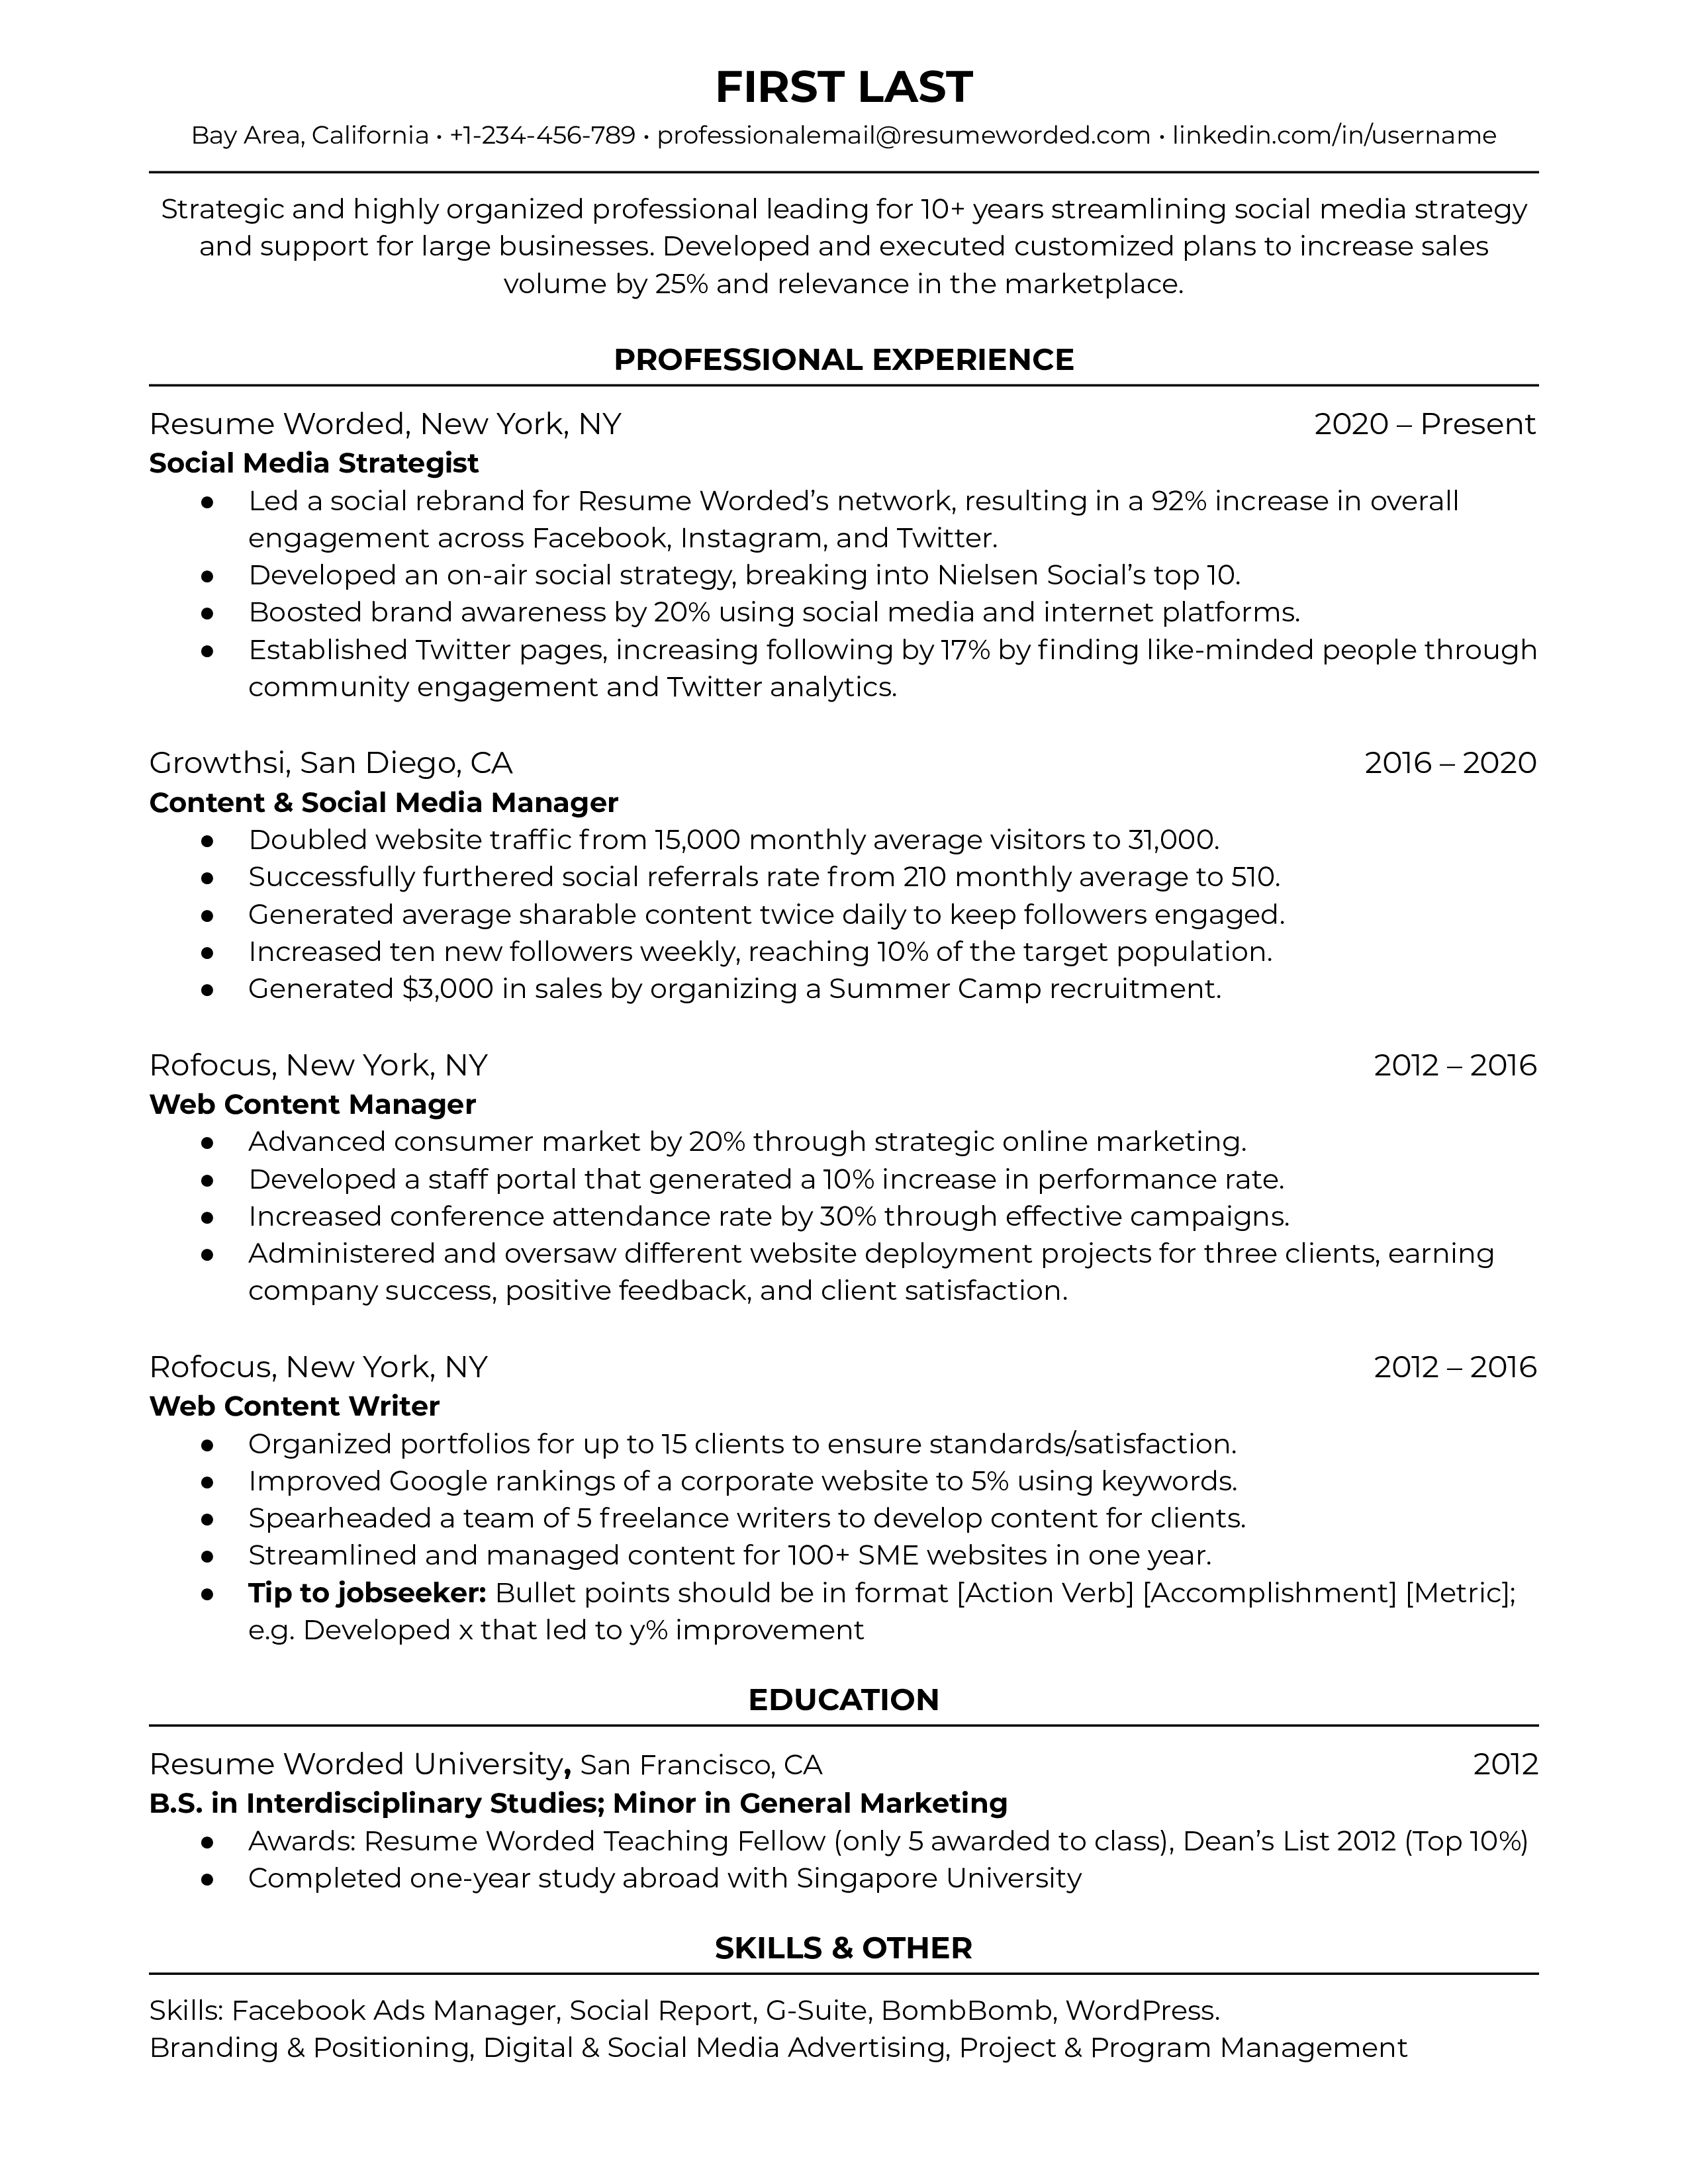 Social media strategist resume template and example